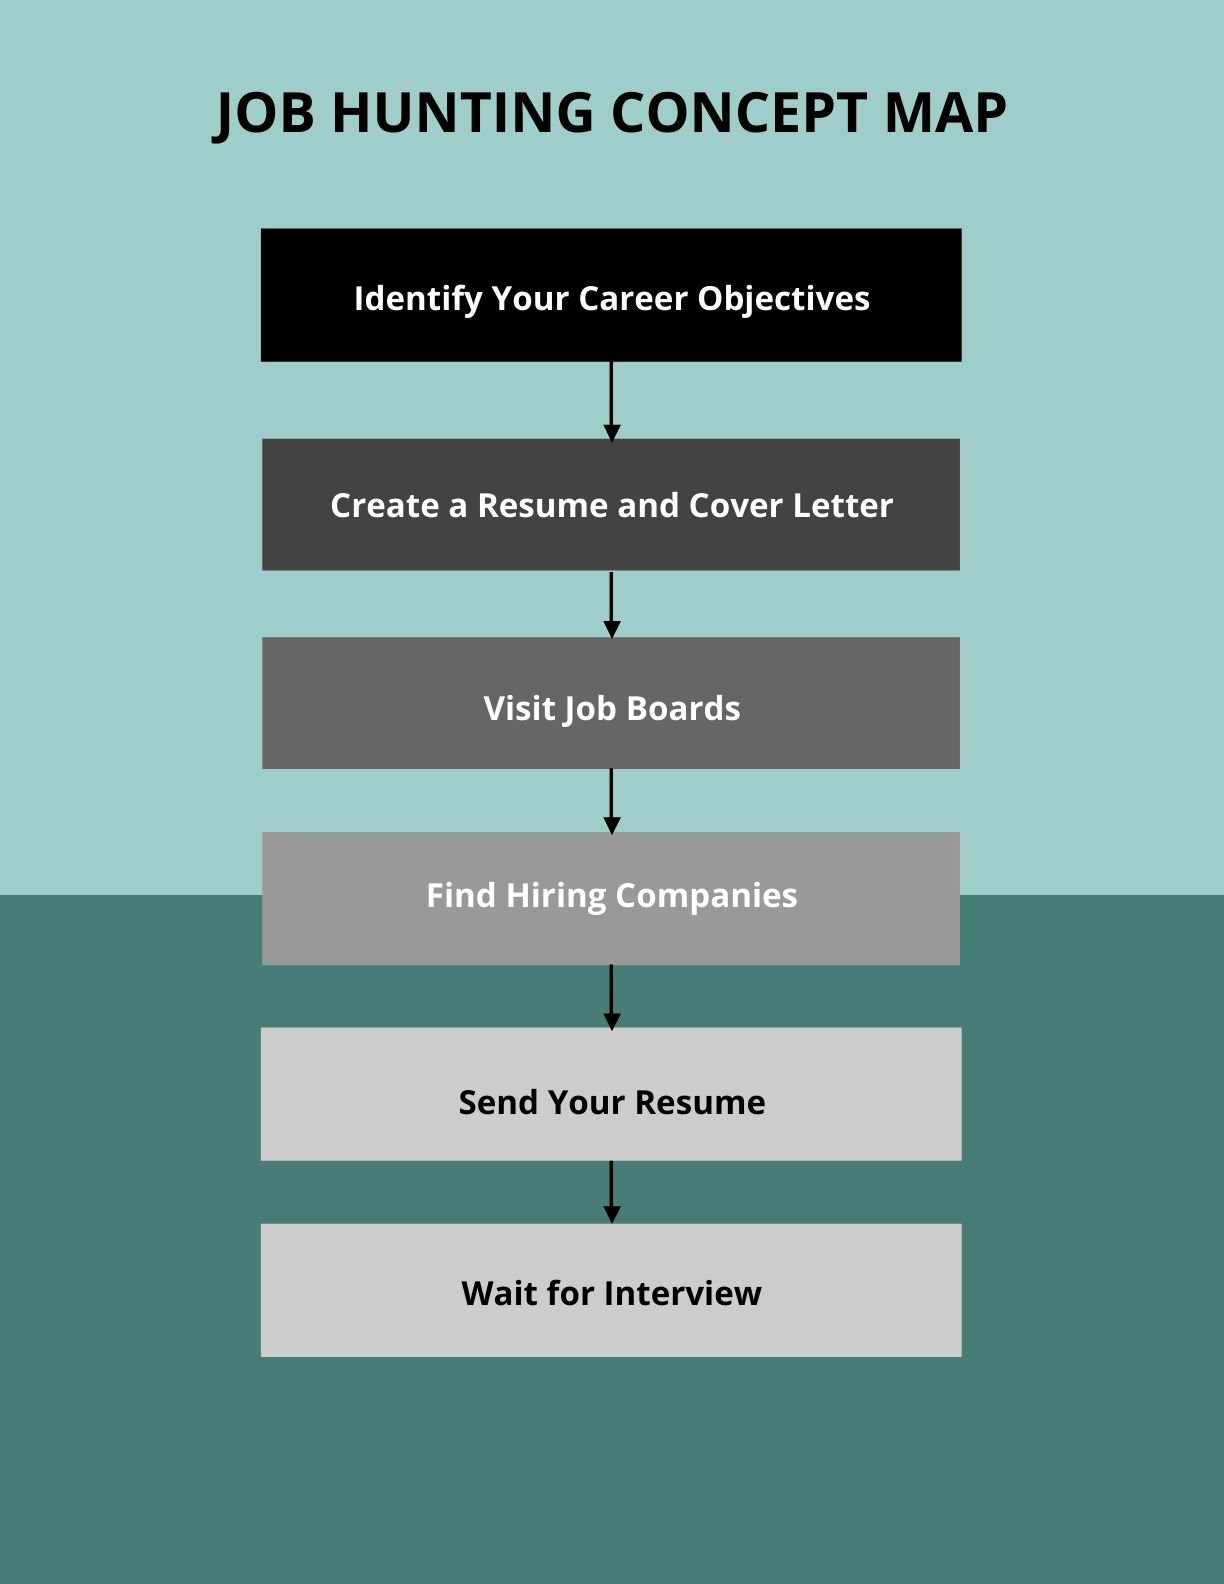 Job Hunting Concept Map Template in Word, Google Docs